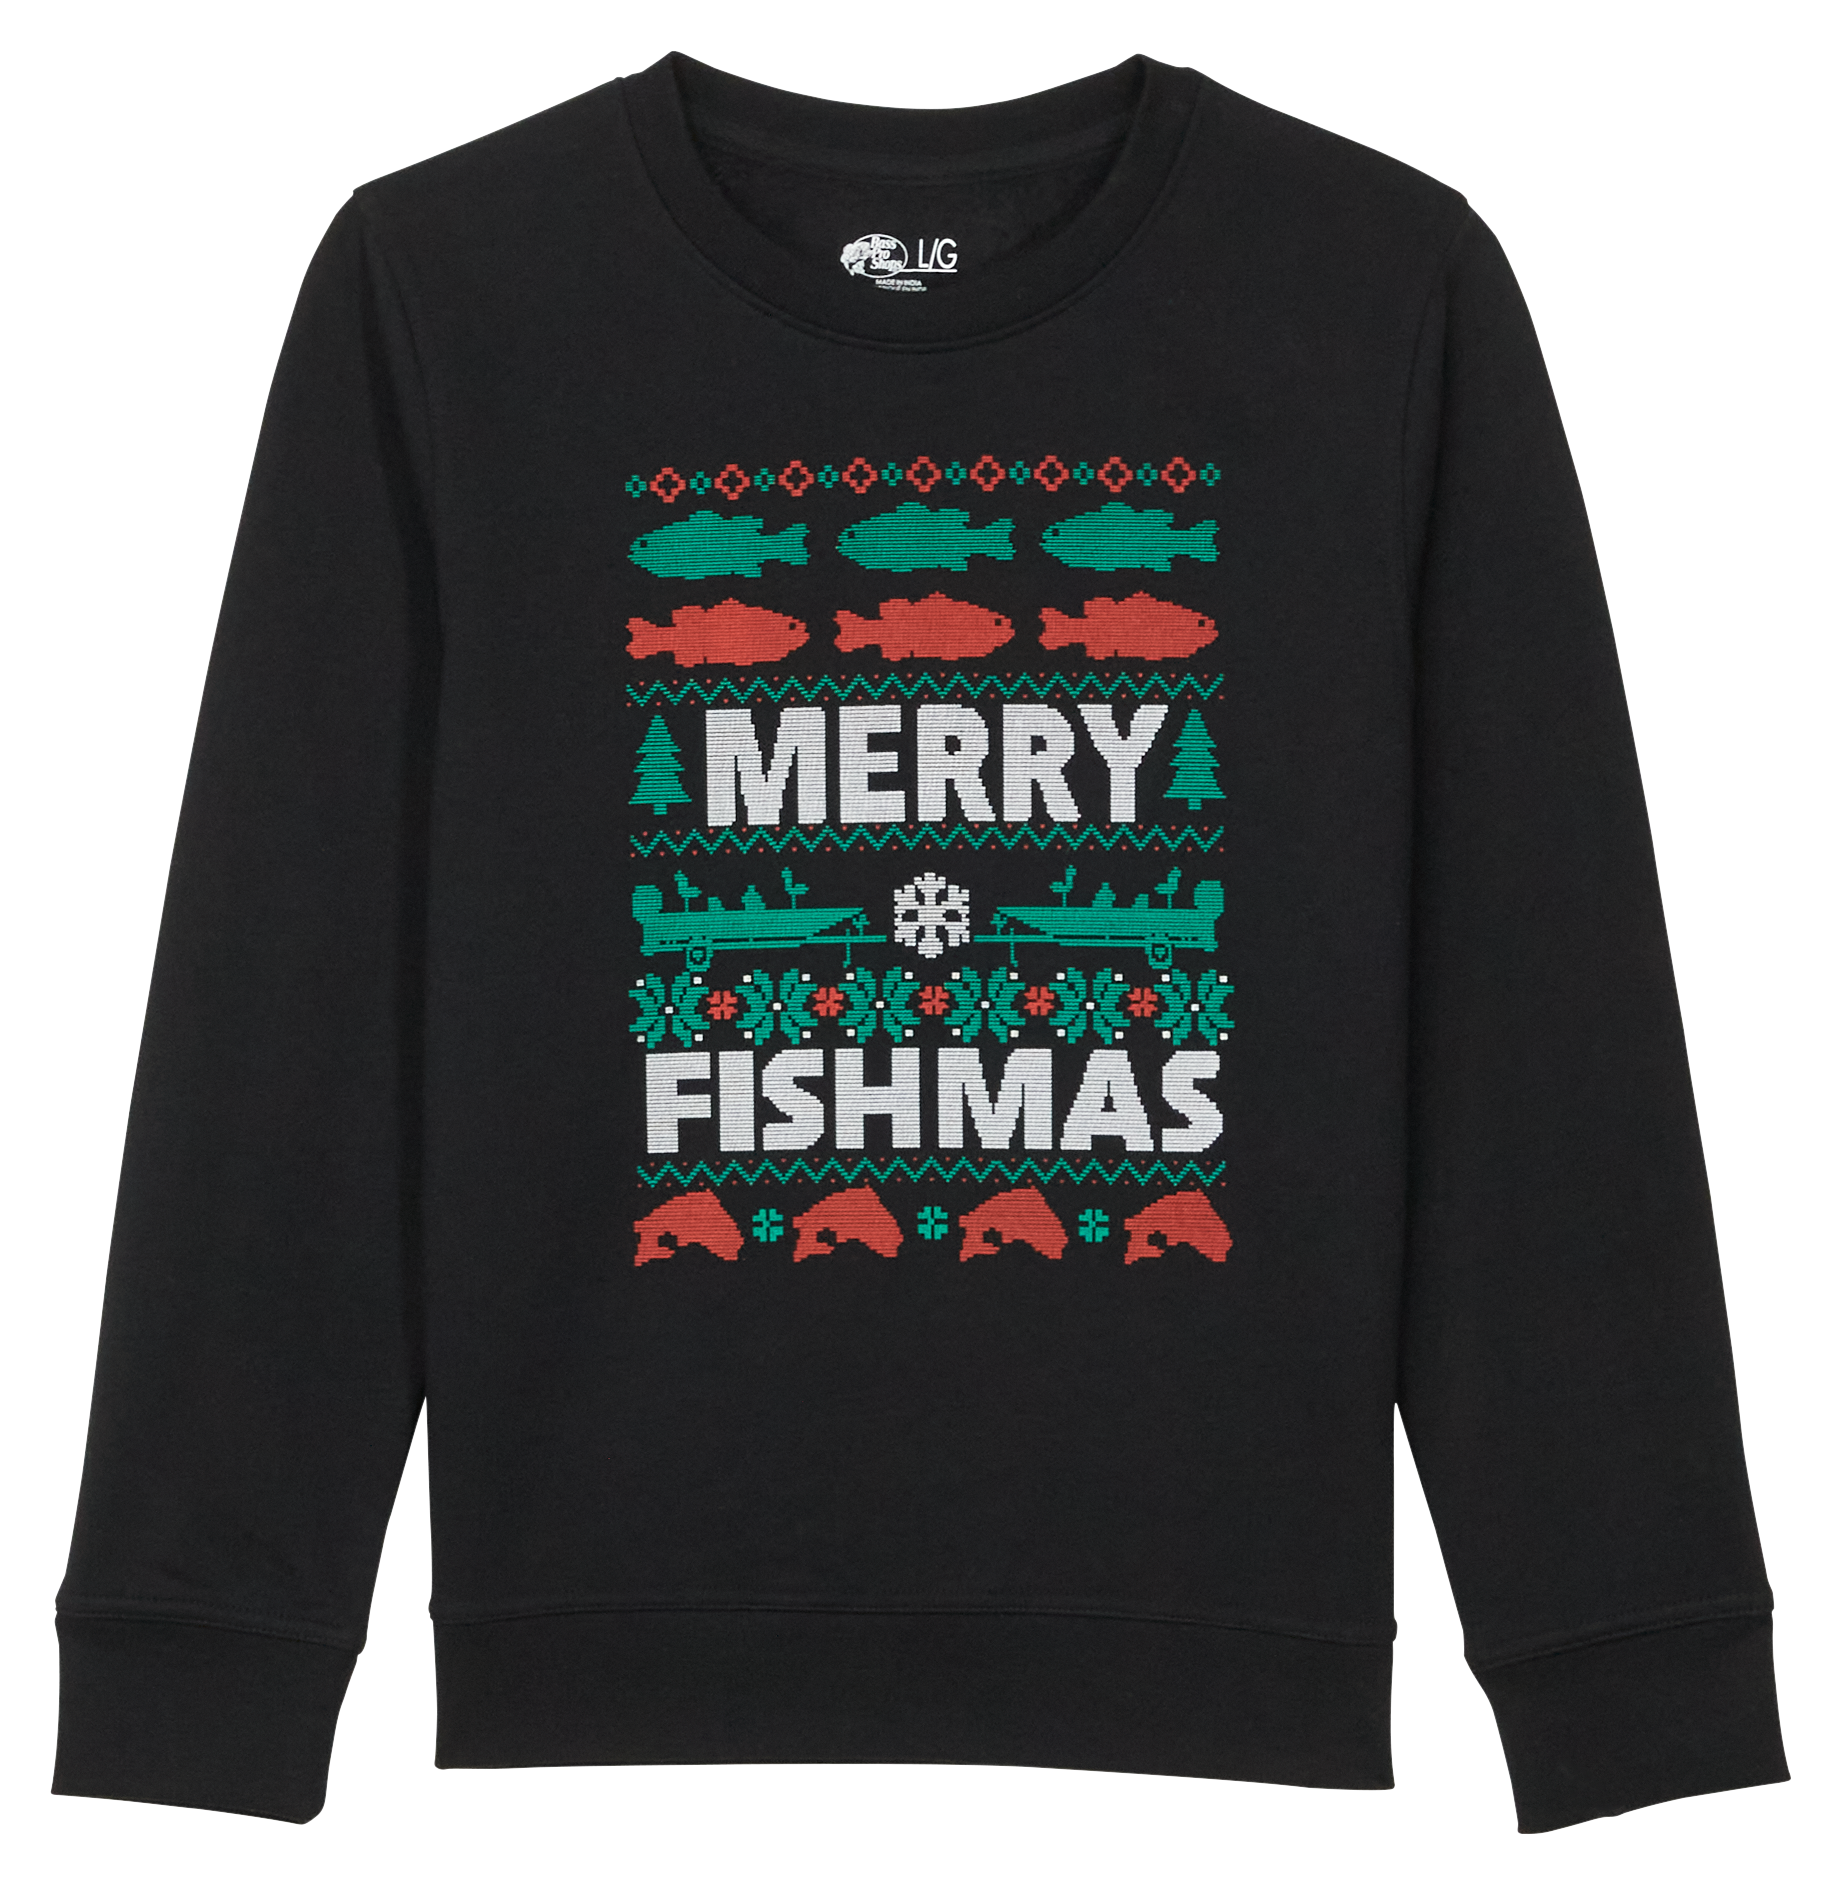 Bass Pro Shops Merry Fishmas Christmas Sweatshirt for Toddlers or